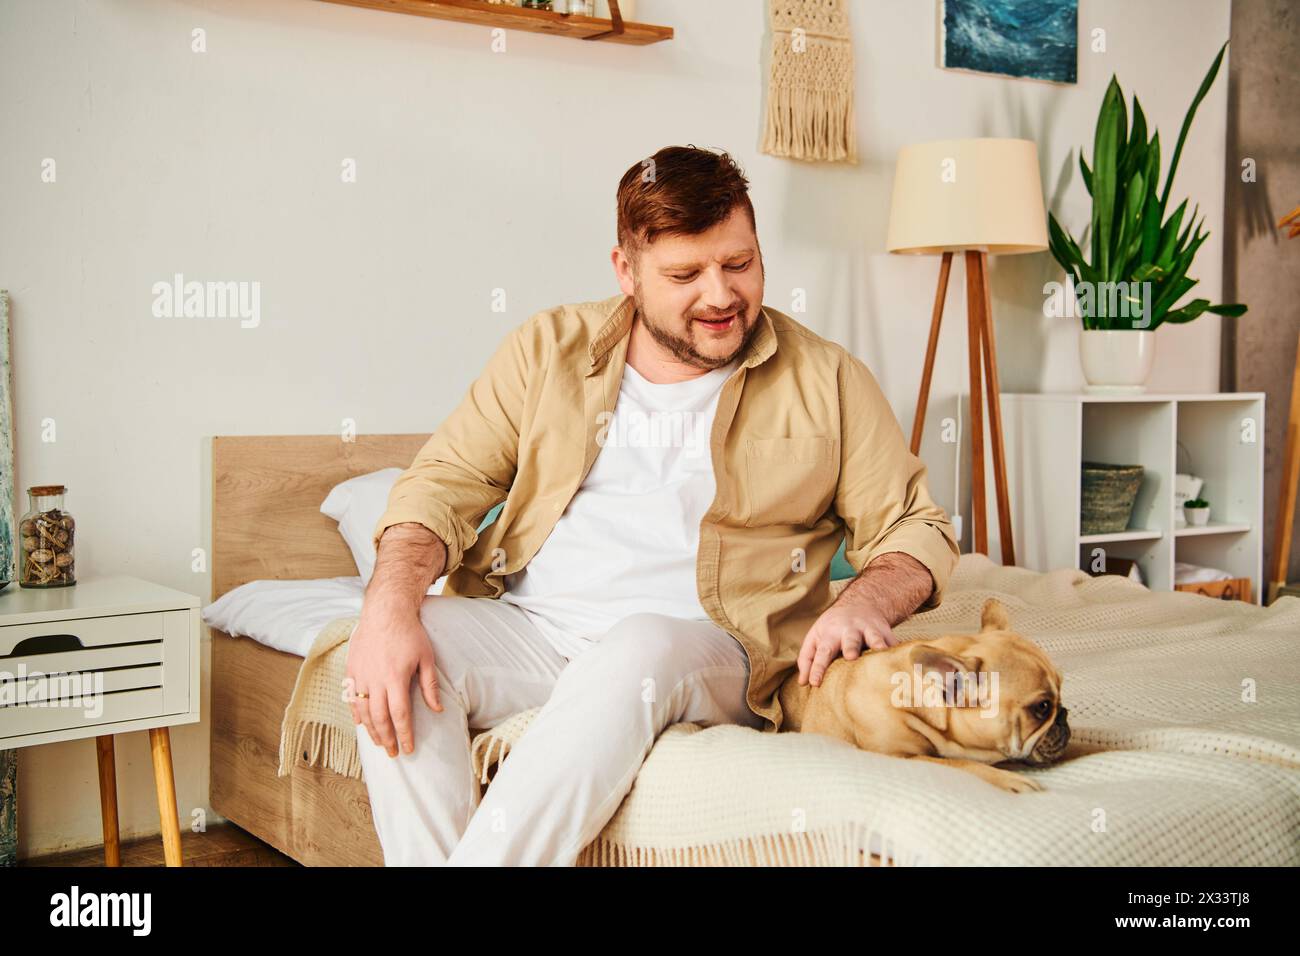 A handsome man relaxes on a bed with his loyal French Bulldog. Stock Photo